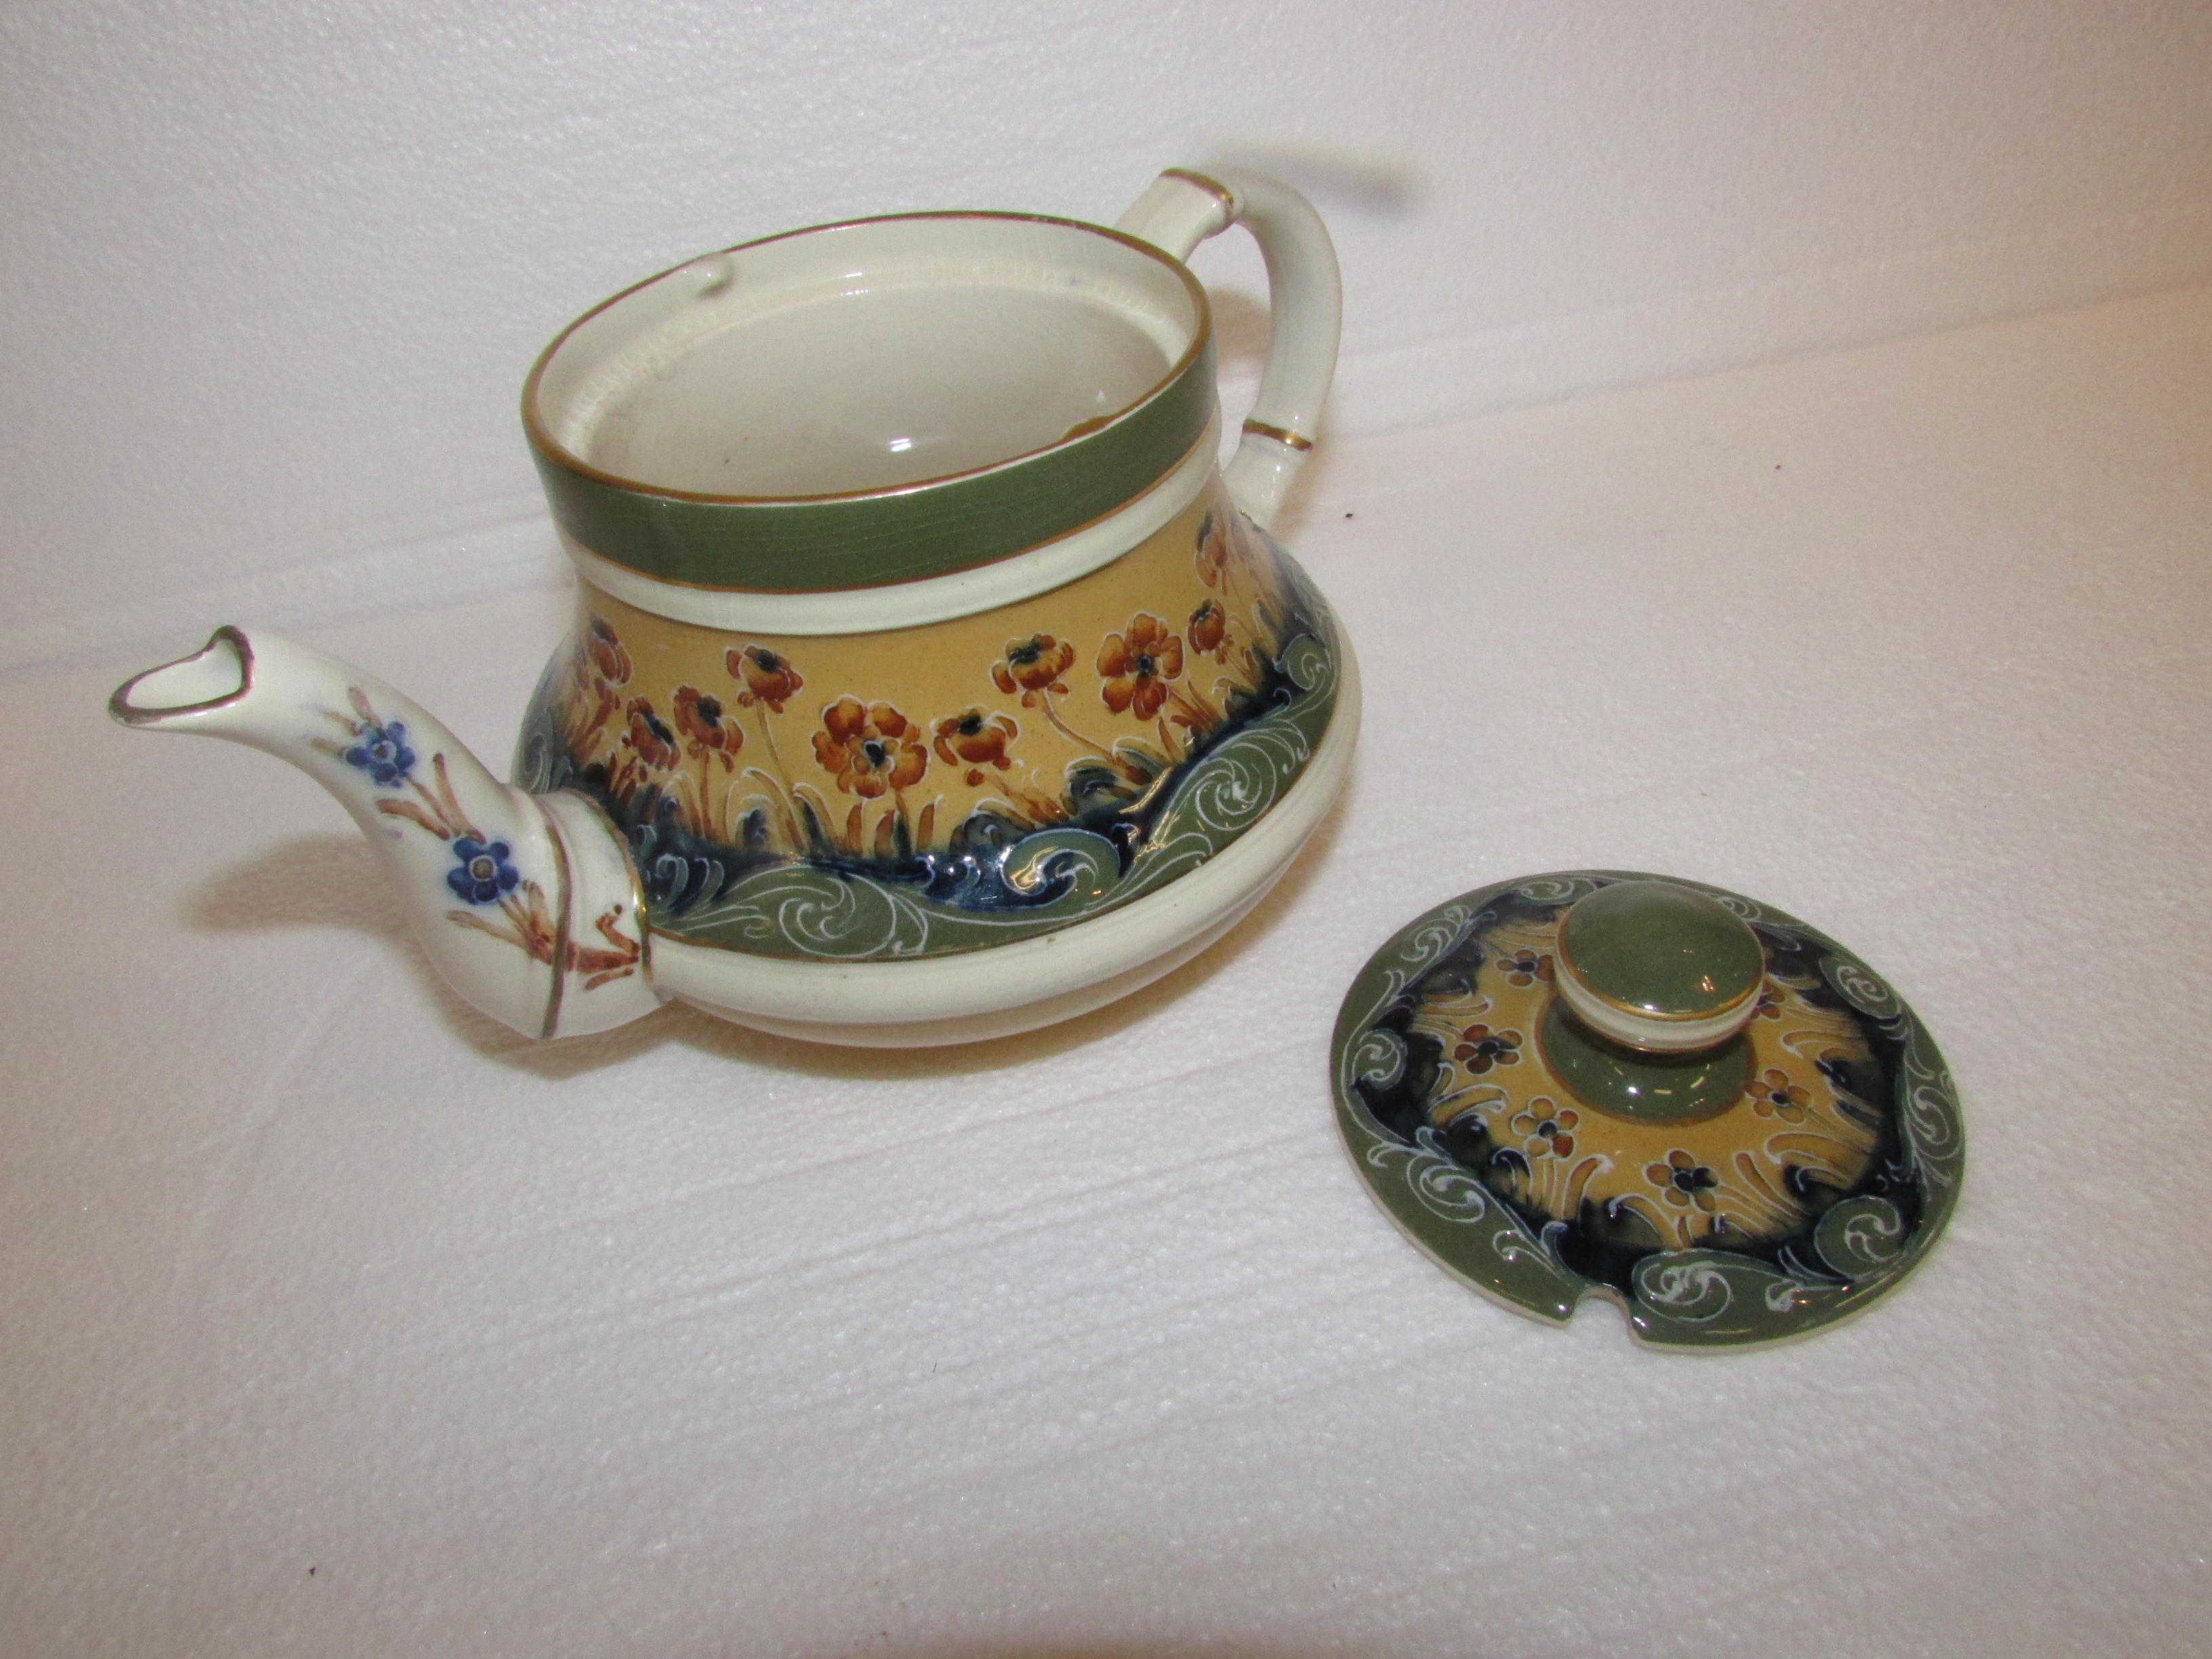 Transitional Macintyre teapot reg no. 401753 decorated with cream and green bands of floral and - Image 3 of 4